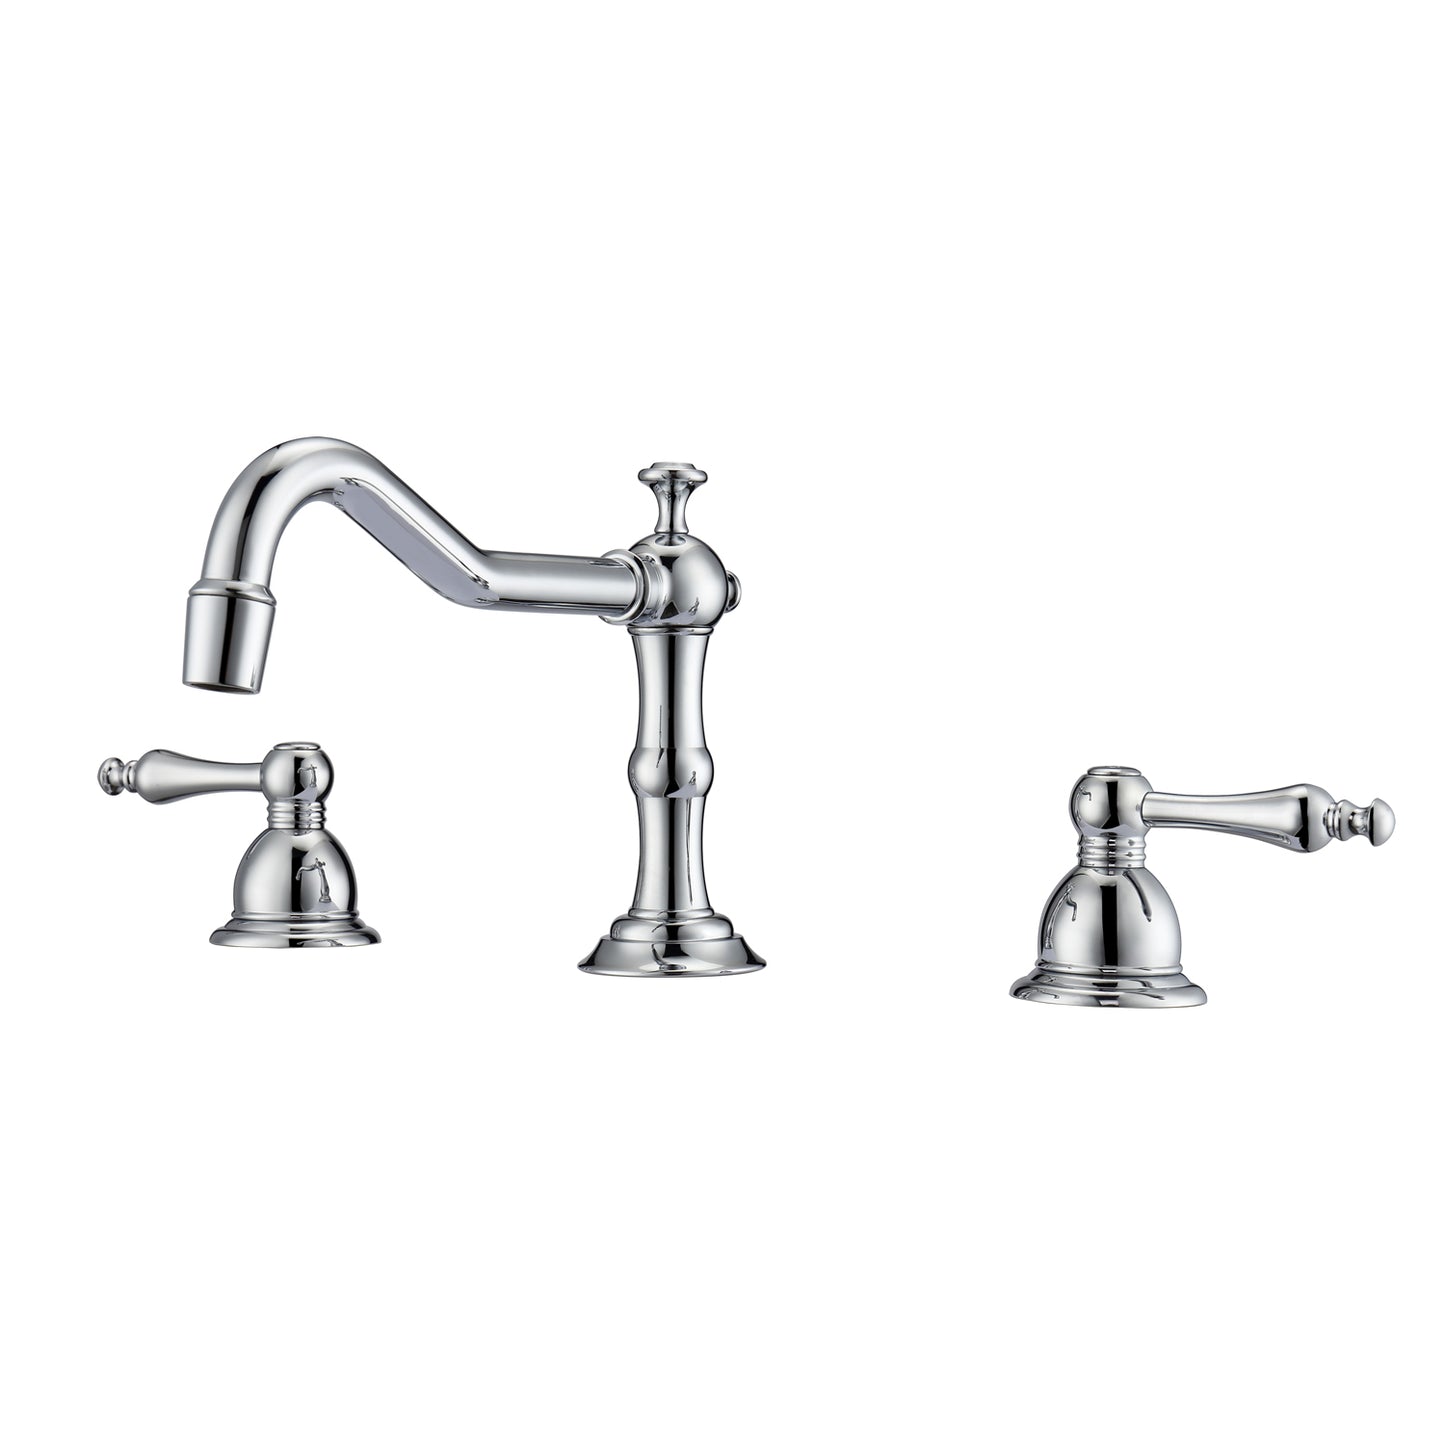 Roma 8" Widespread Chrome Bathroom Faucet with Metal Lever Handles